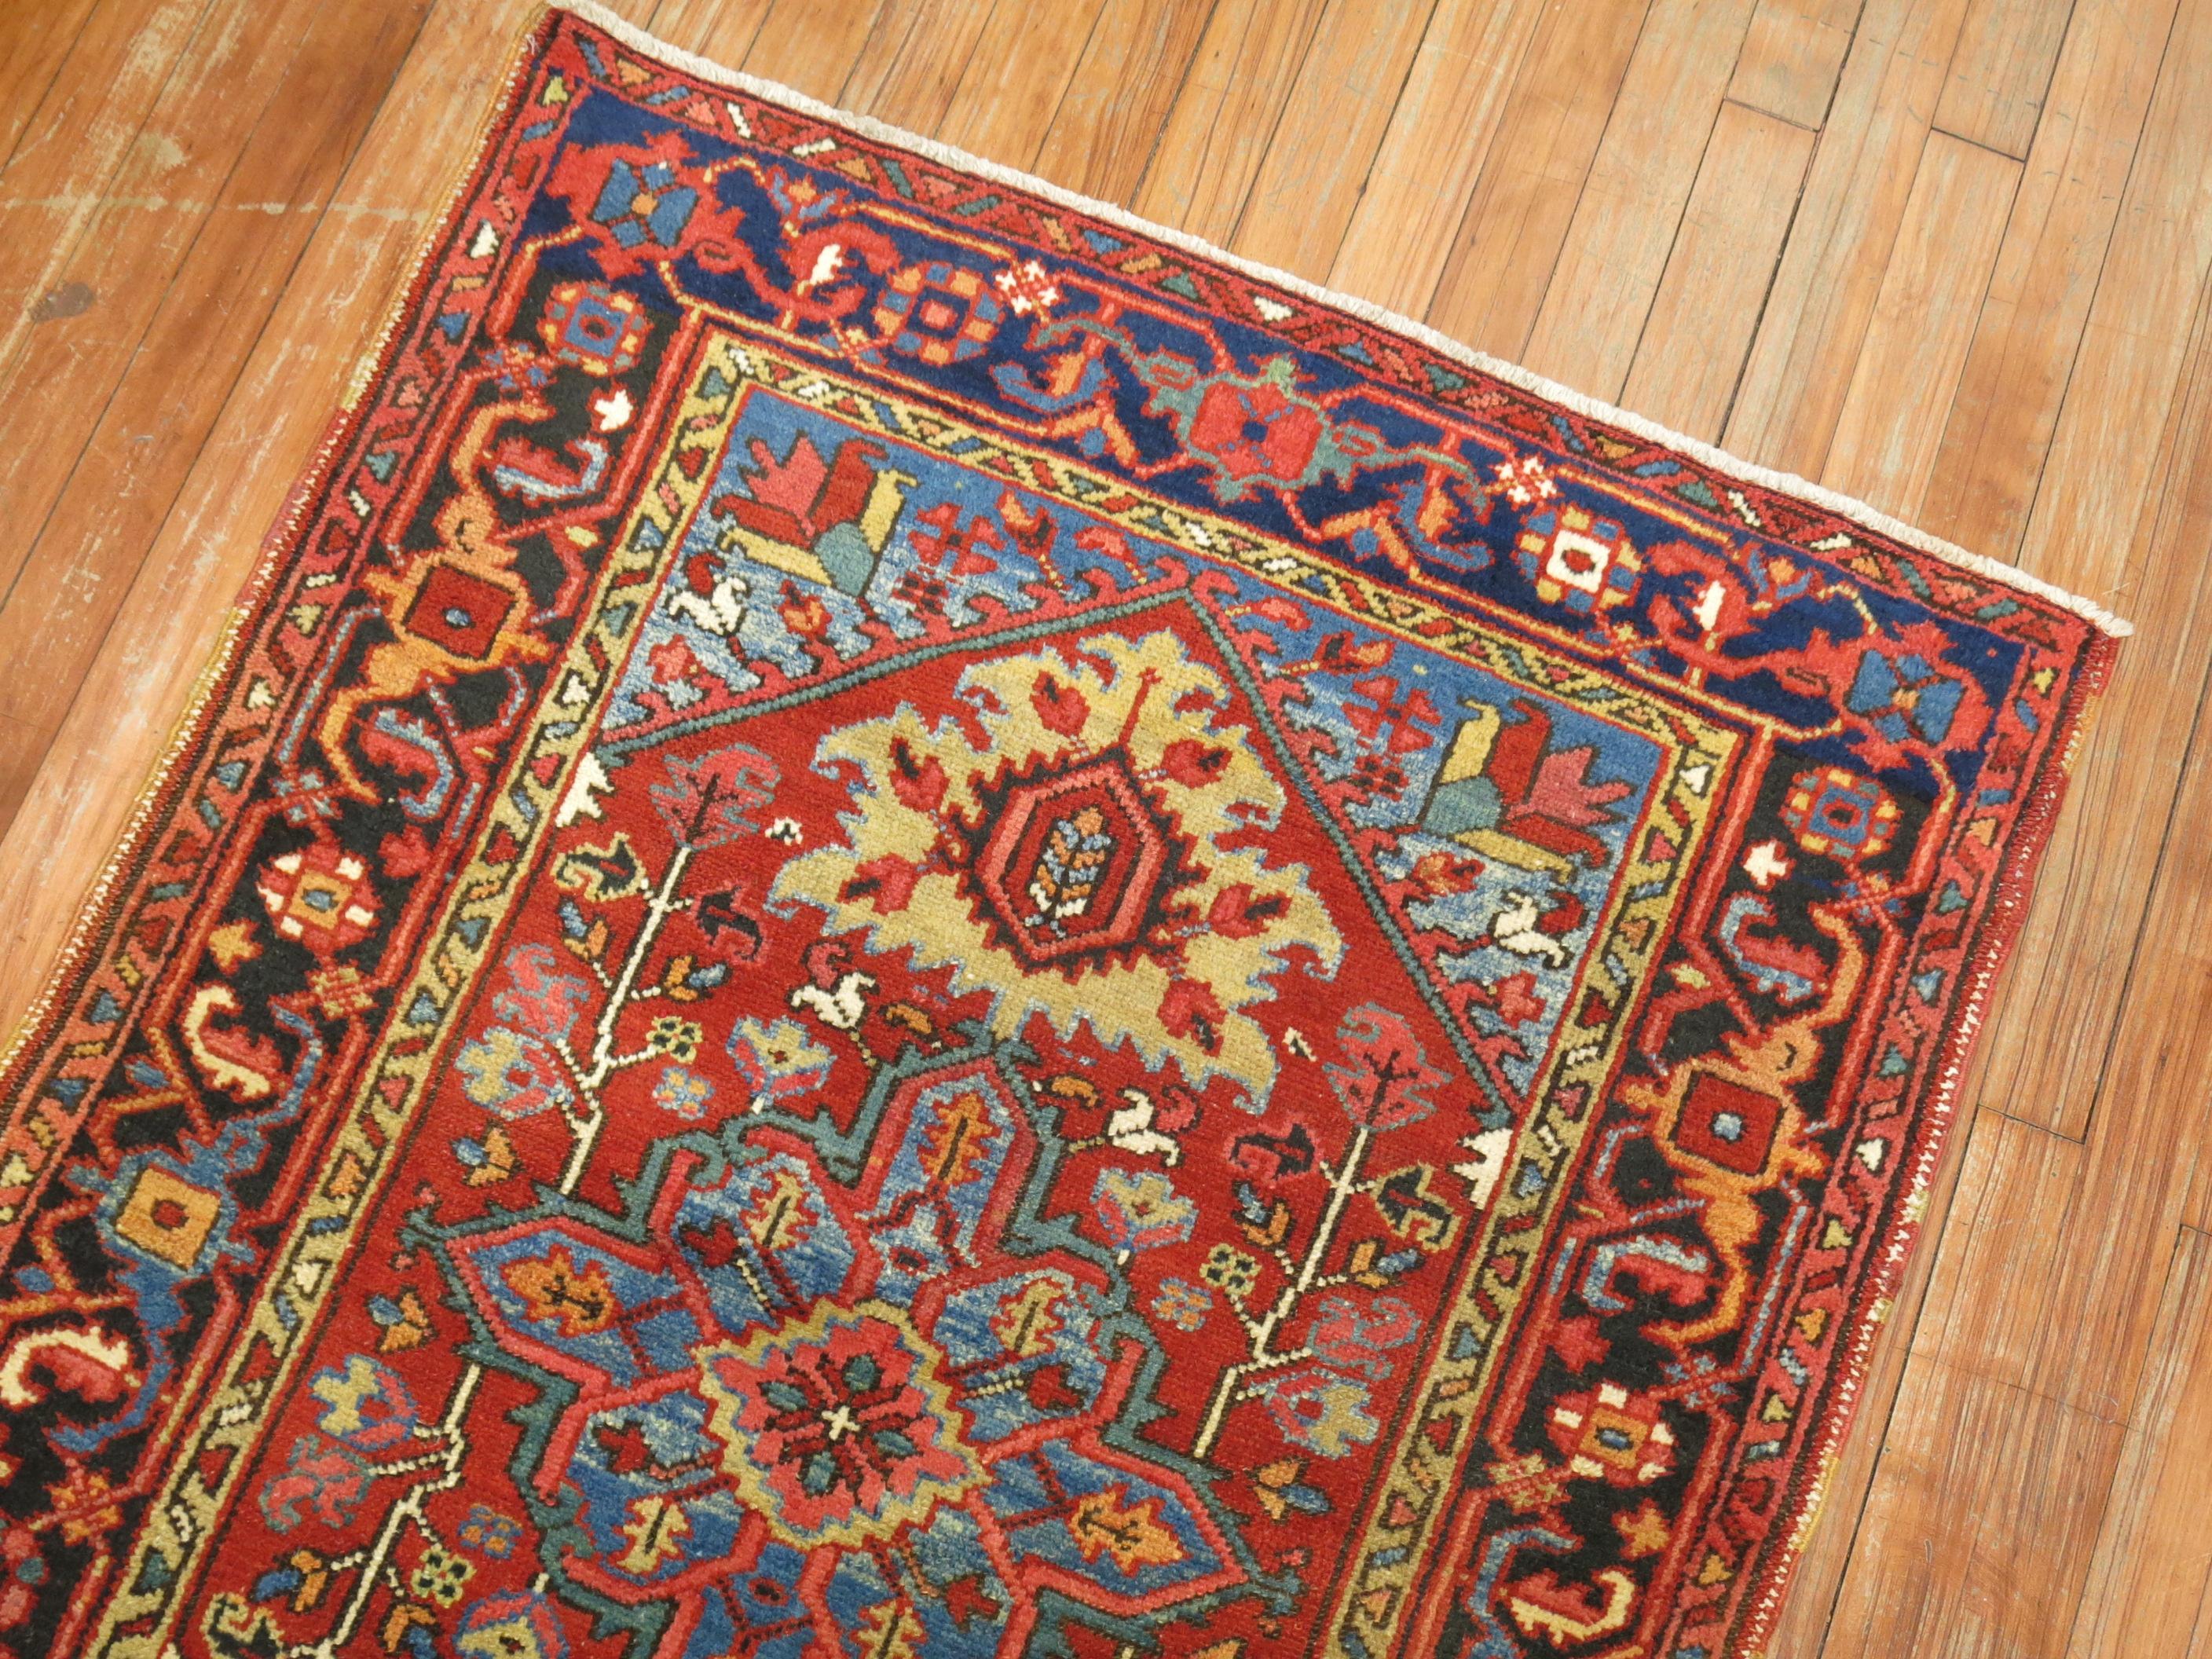 Hand-Woven Colorful Antique Persian Heriz Scatter Rug